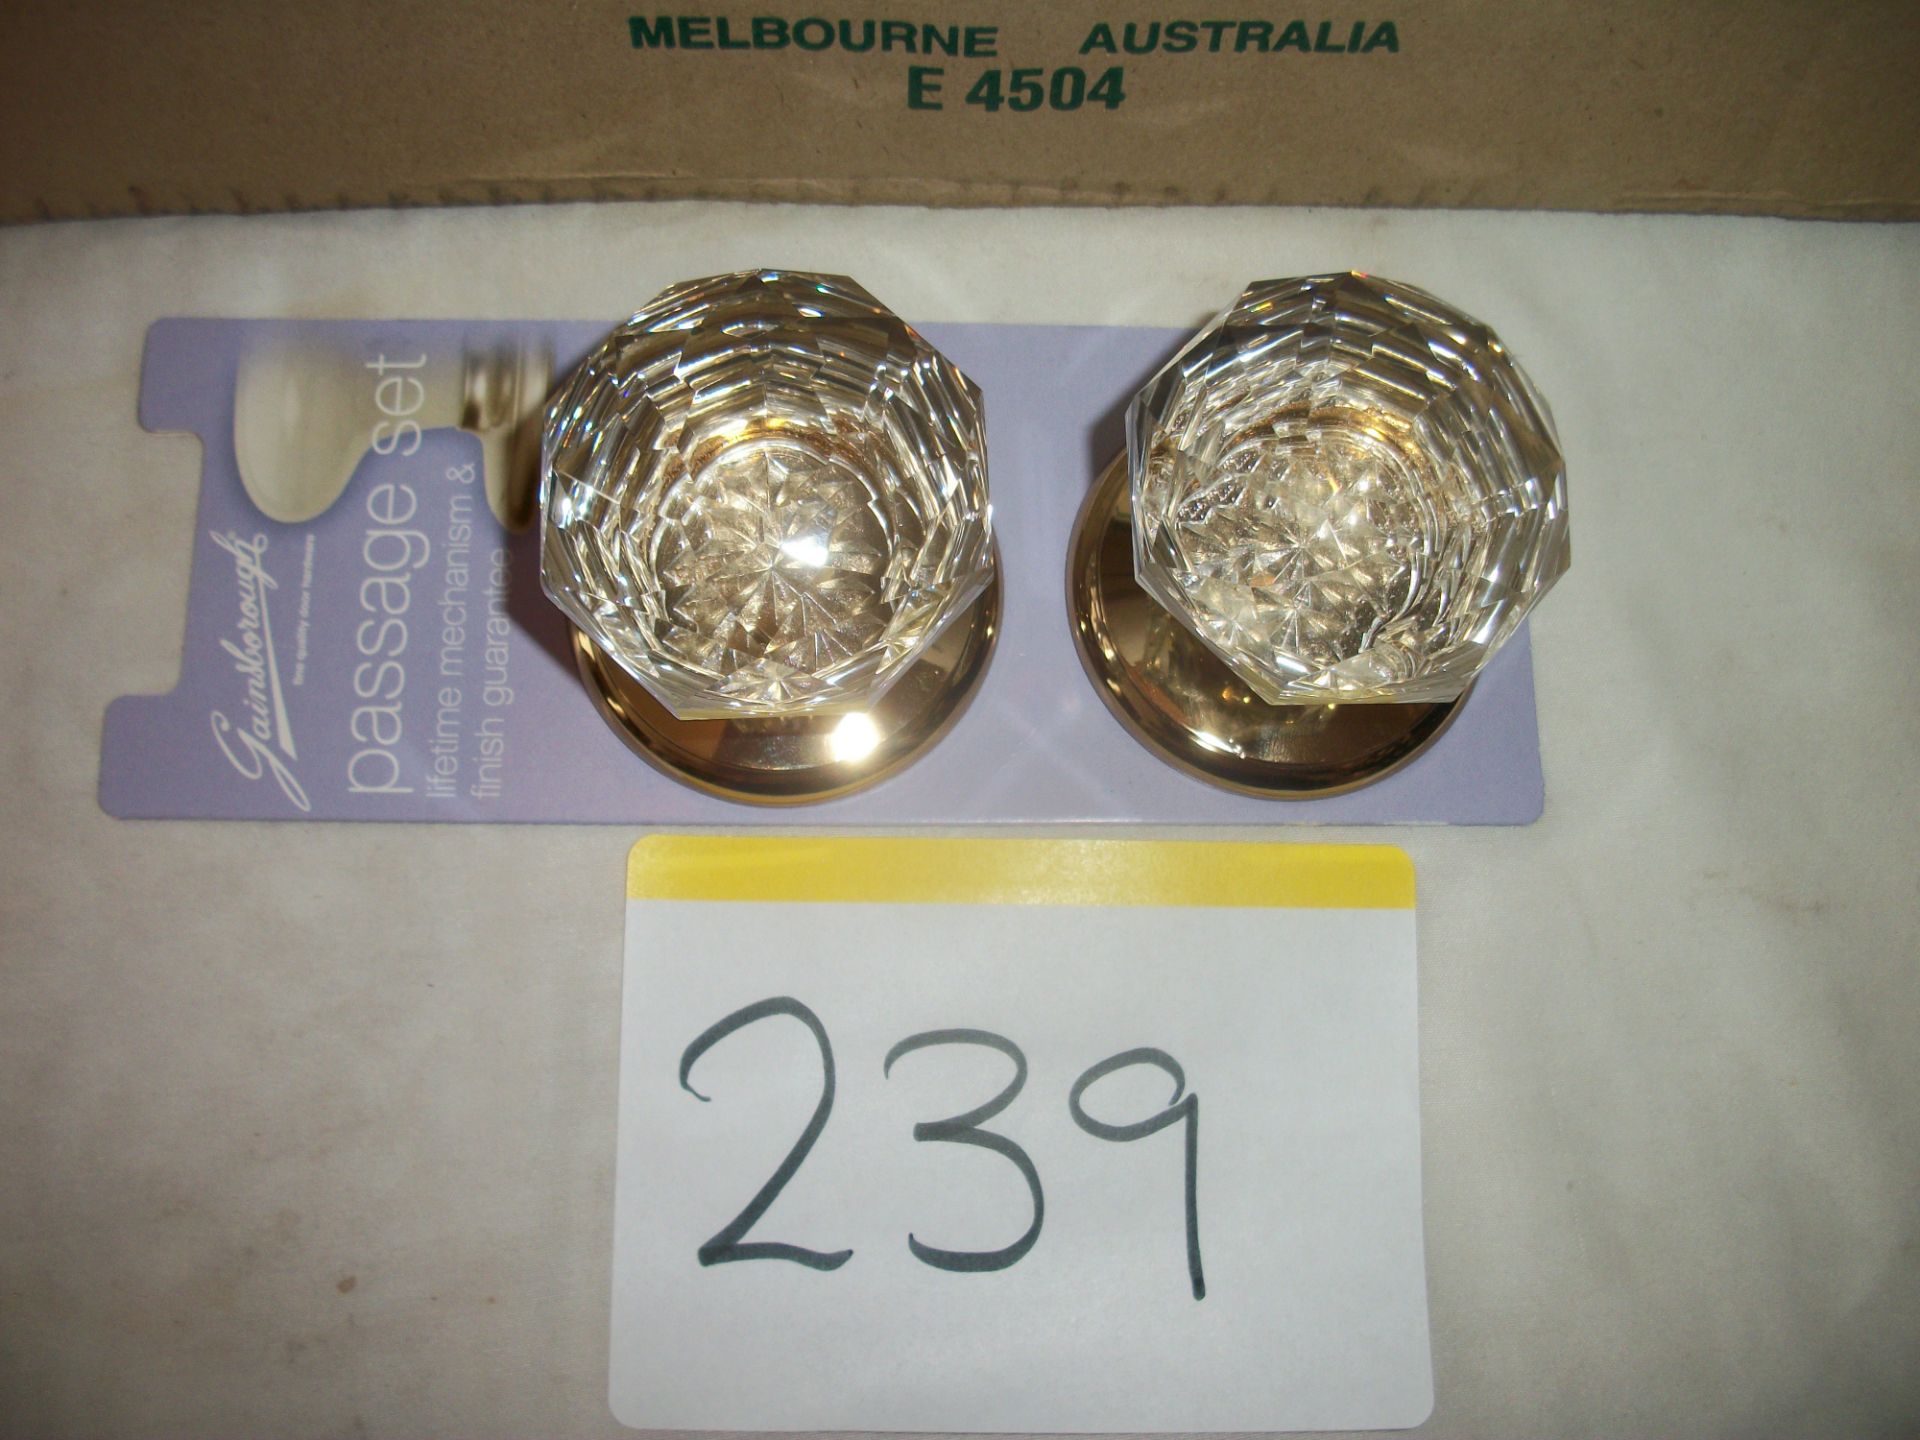 Gainsborough Crystal Knob Set Imported from Australia RRP £45 per Set - Image 2 of 2